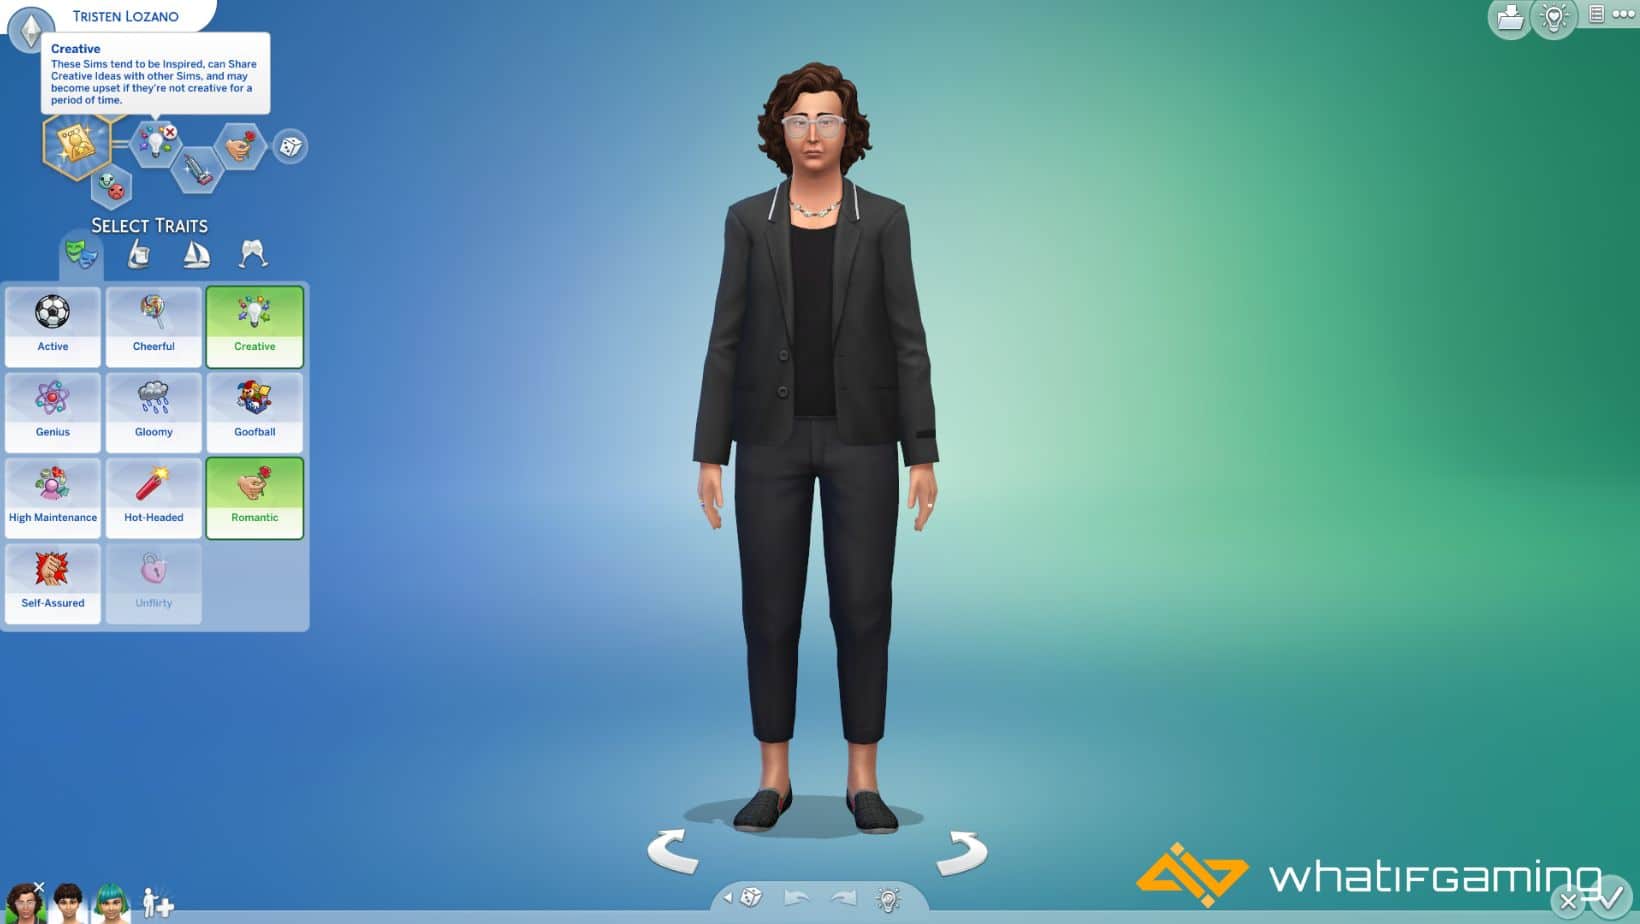 You can freely change the traits of your sims using cheats.